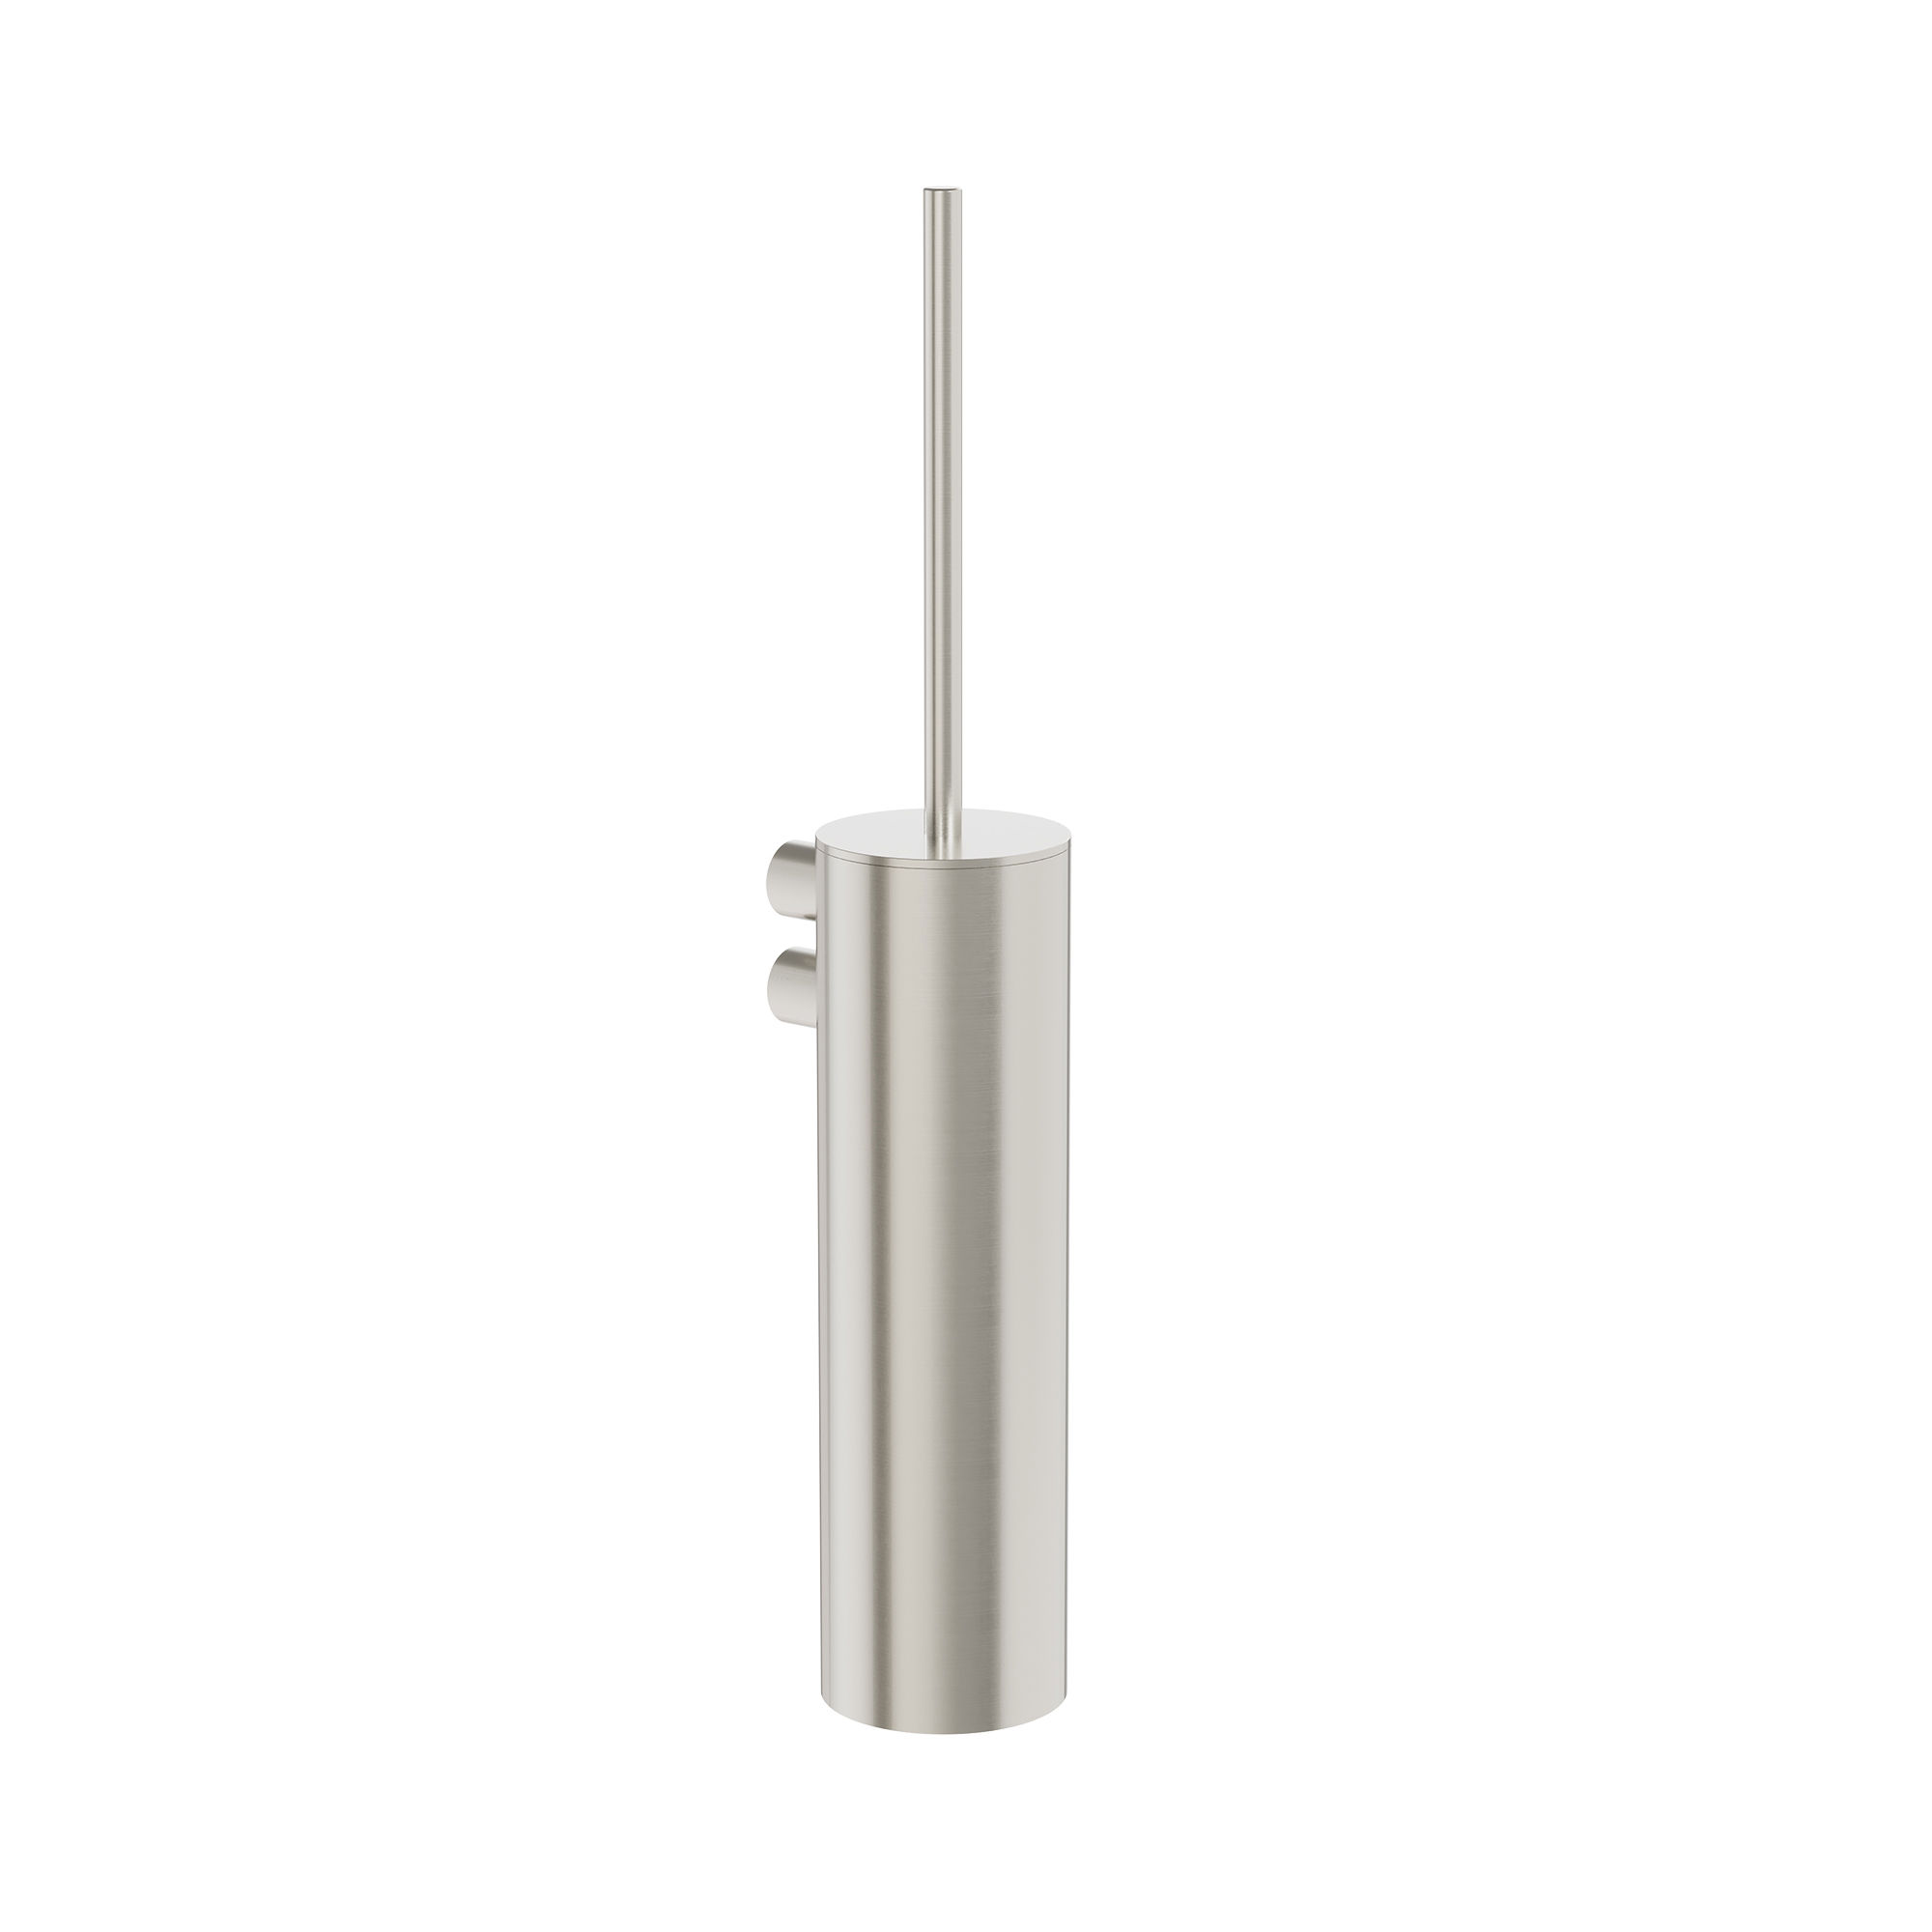 The Lui Round Wall Mounted Toilet Brush Holder